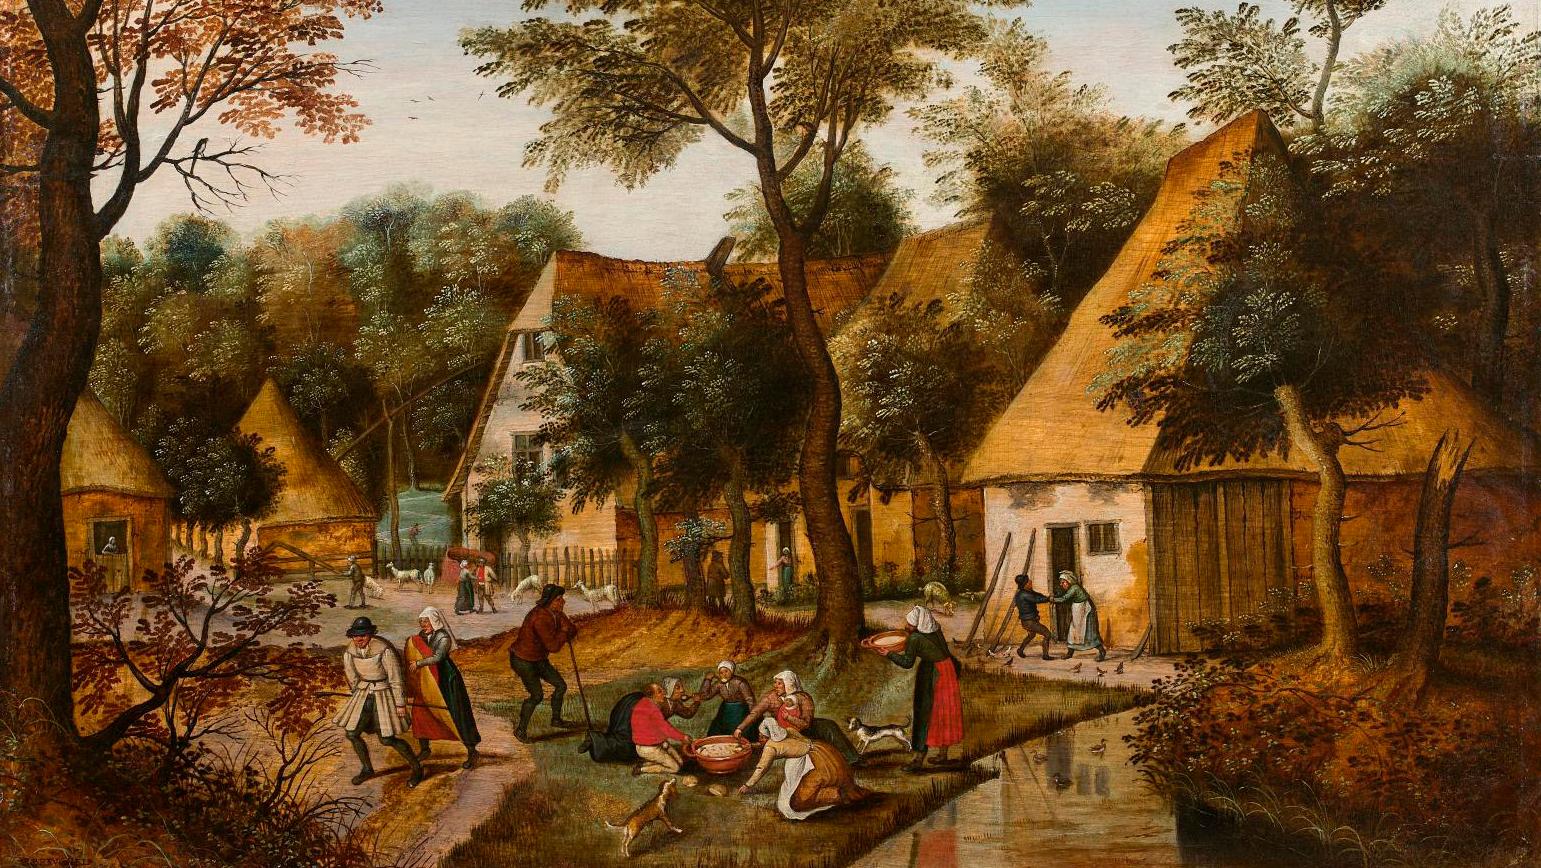 Pieter Brueghel the Younger (1564-1638), The Peasants’ Meal in the Village, oil on... Trophies for Daret and Bruegel 